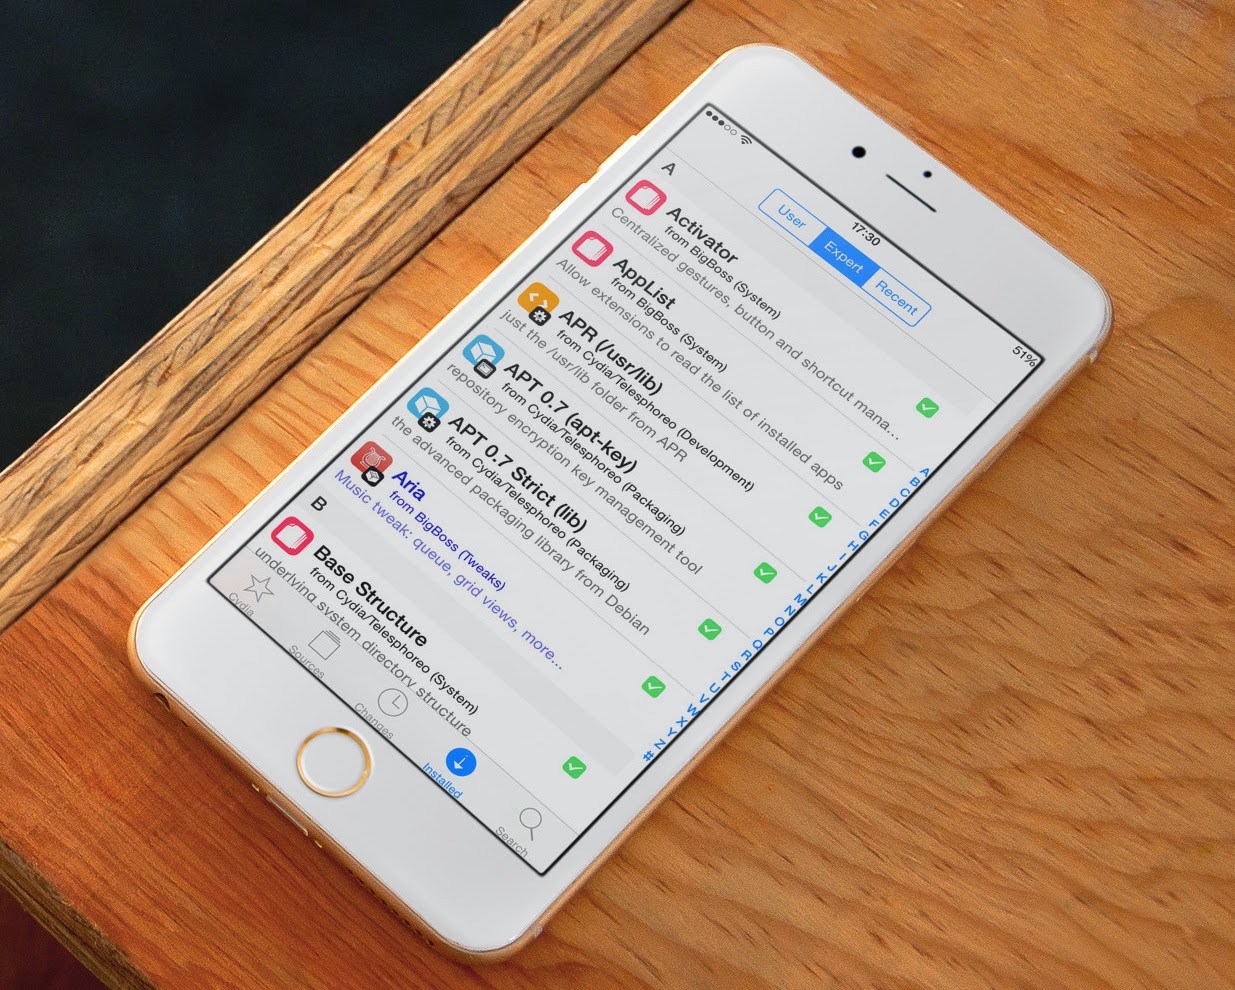 33 new and updated tweaks to check out This Weekend